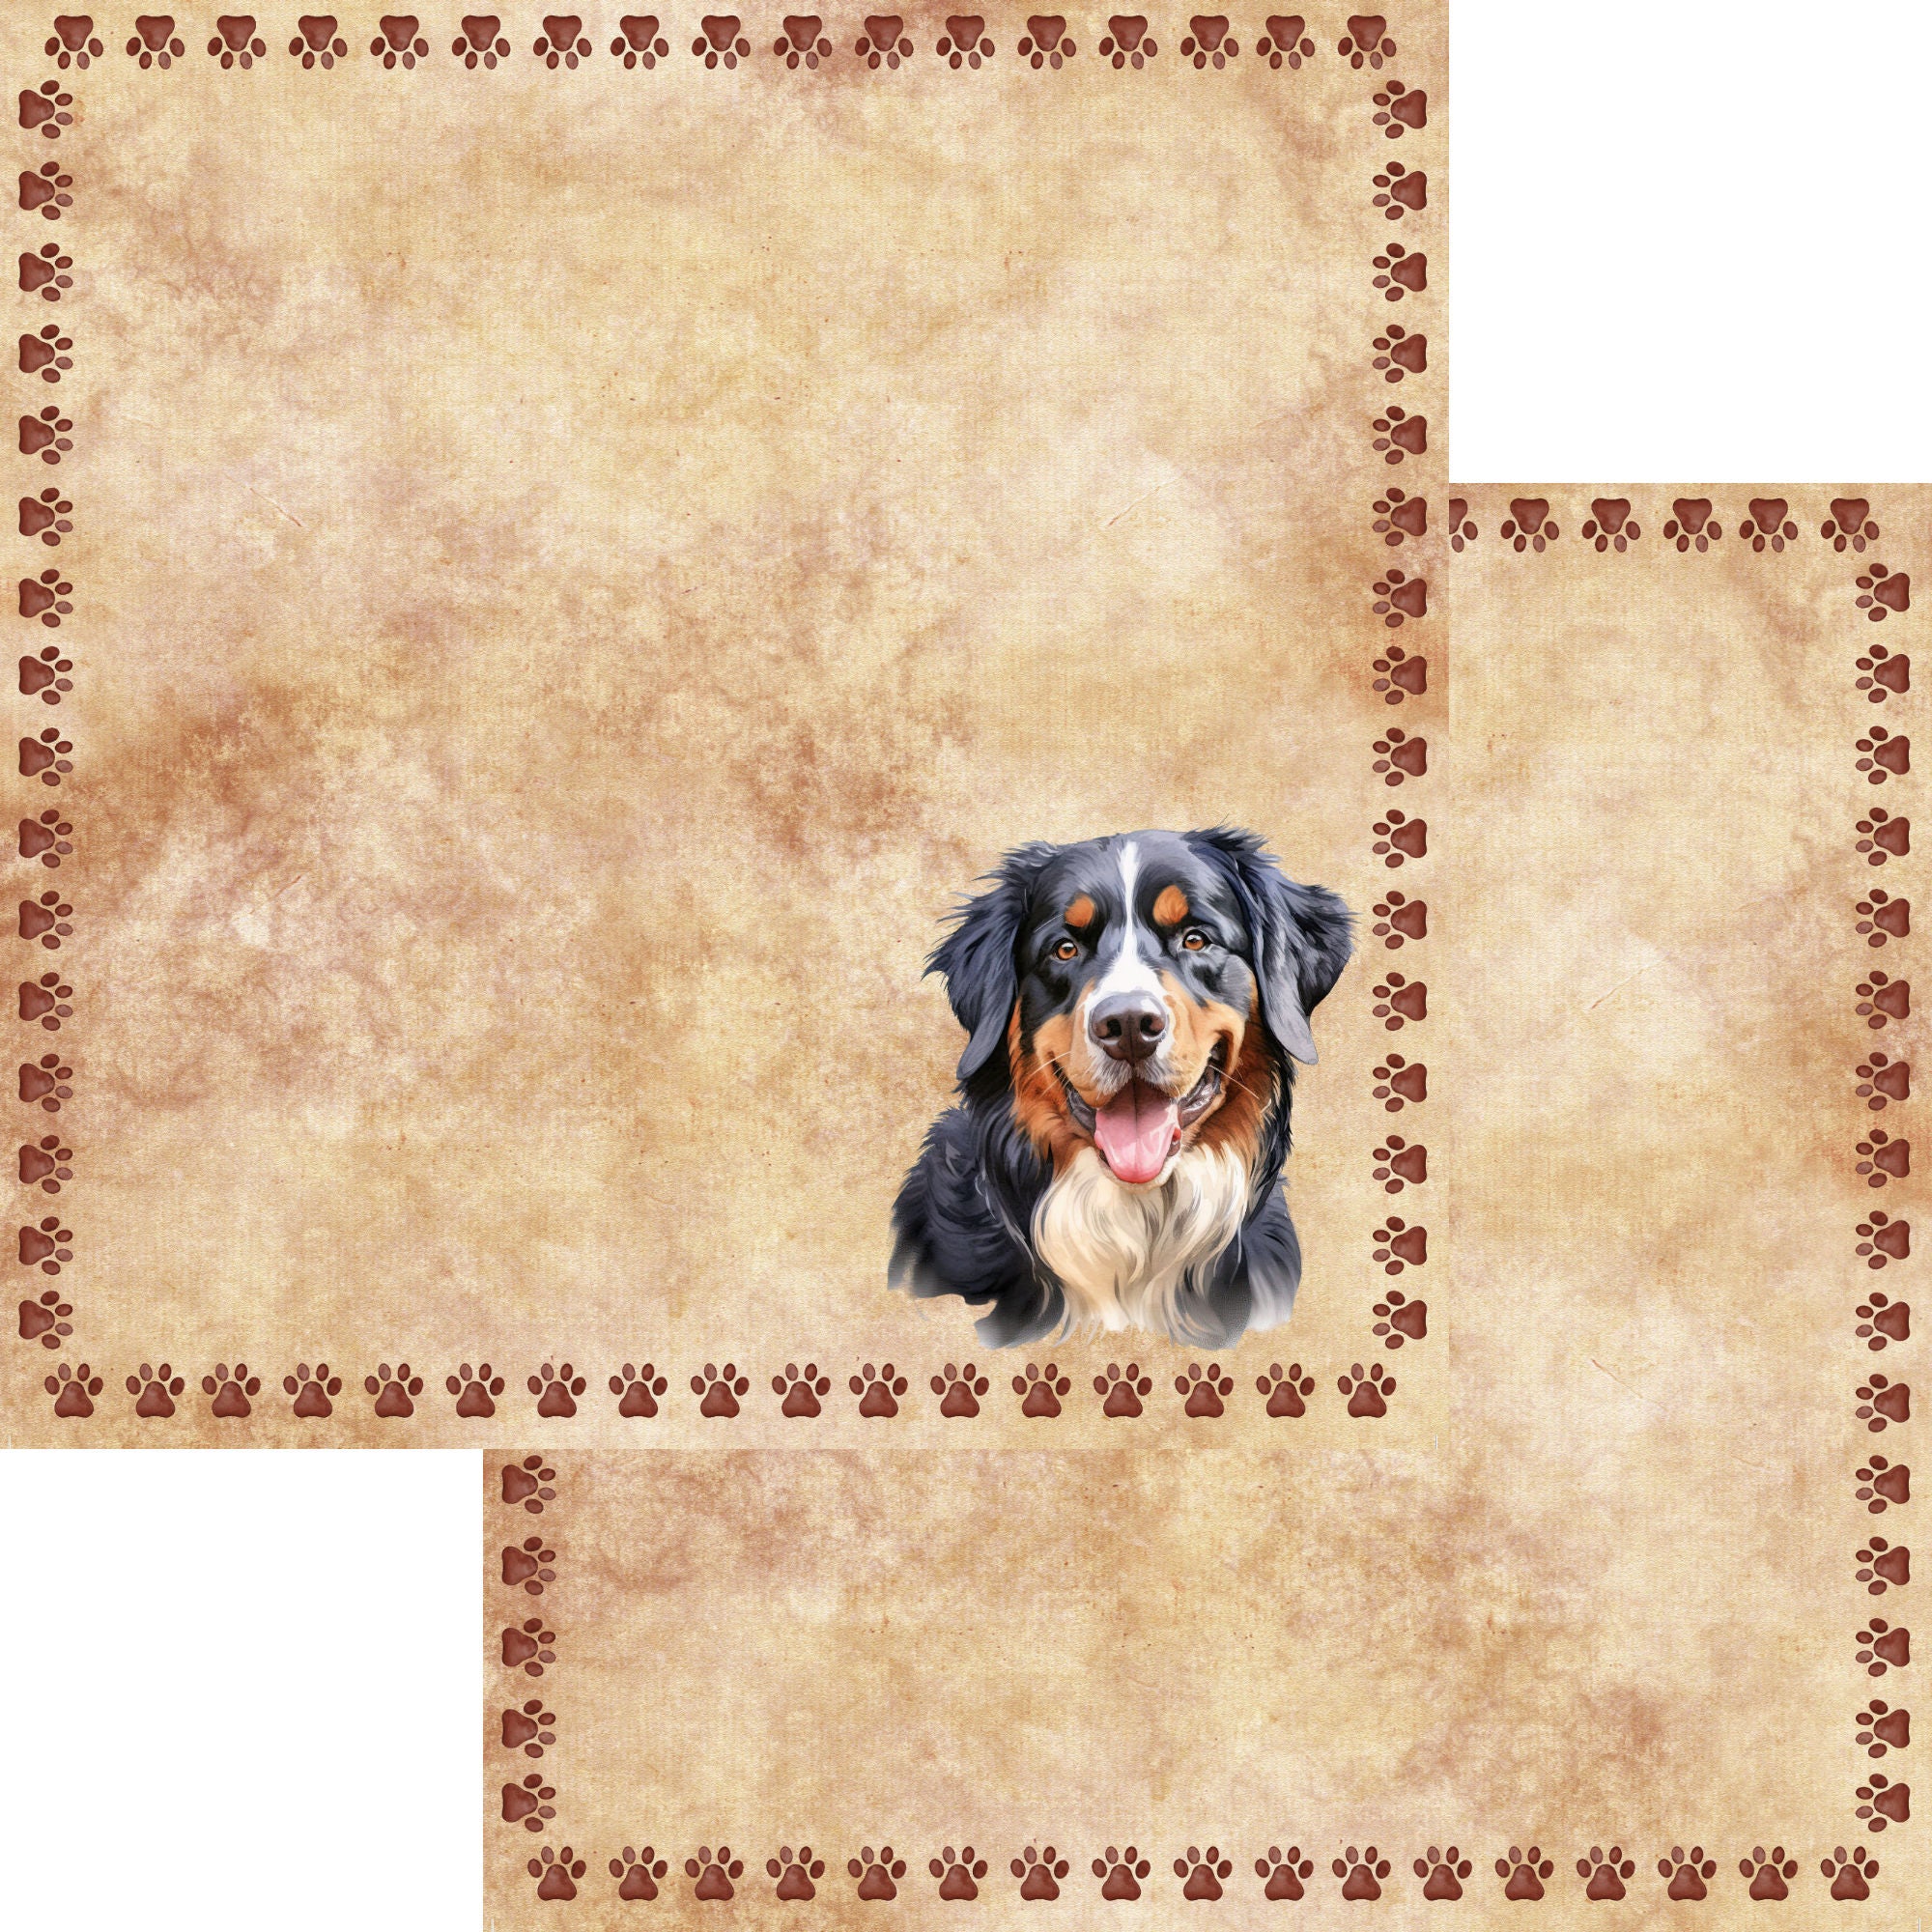 Dog Breeds Collection Bernese Mountain Dog 12 x 12 Double-Sided Scrapbook Paper by SSC Designs